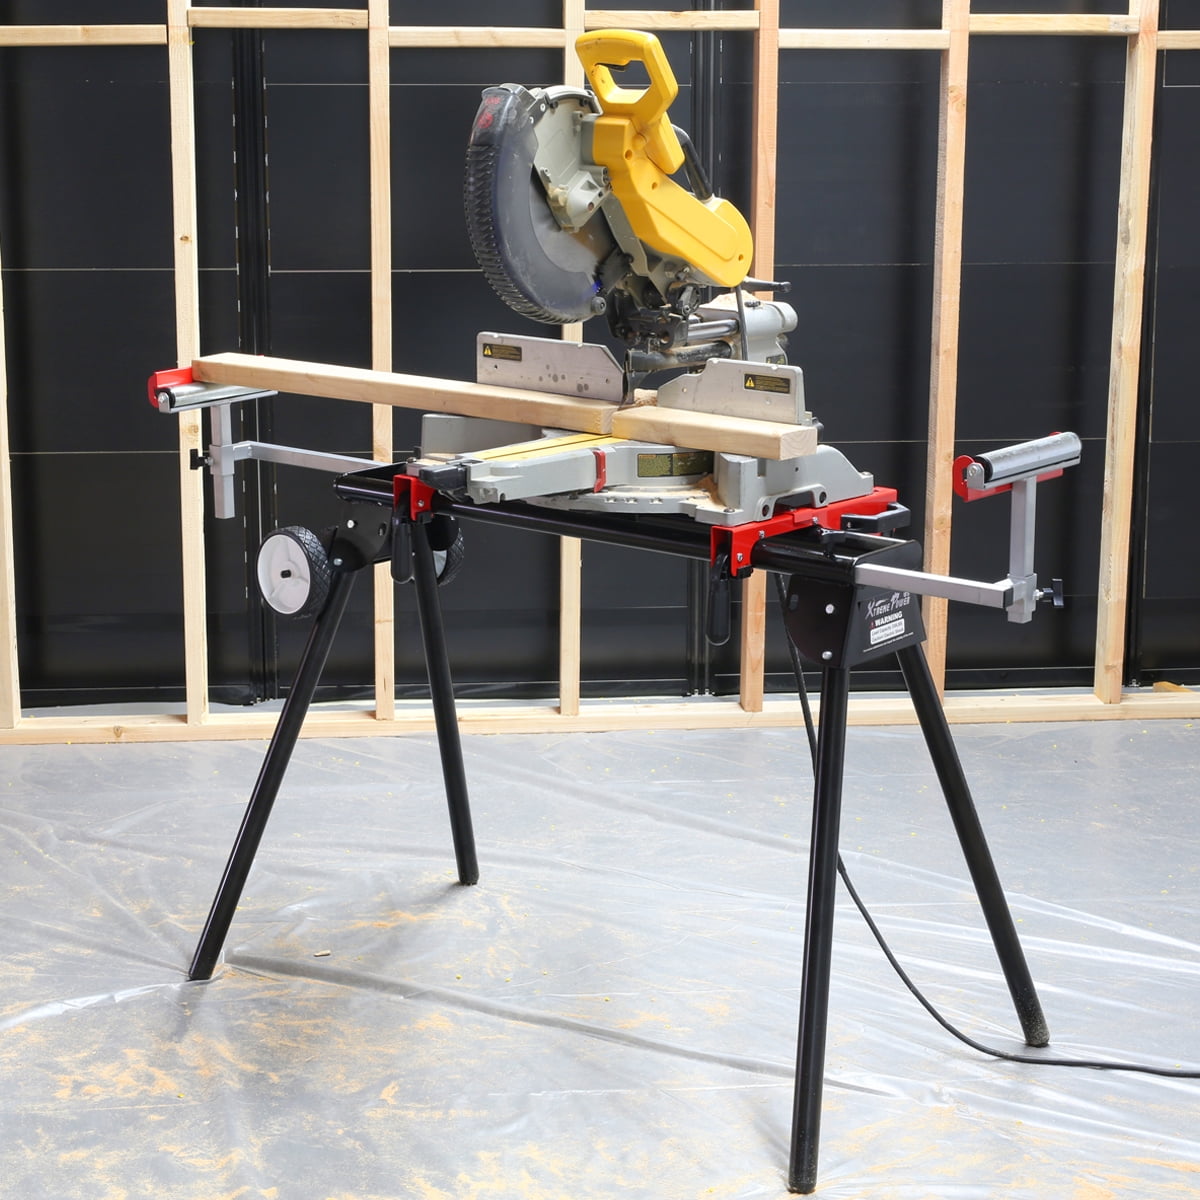 HEAVY DUTY MITRE SAW STAND WORK STATION MITER CHOP BENCH INDUSTRIAL ROLLER STAND 